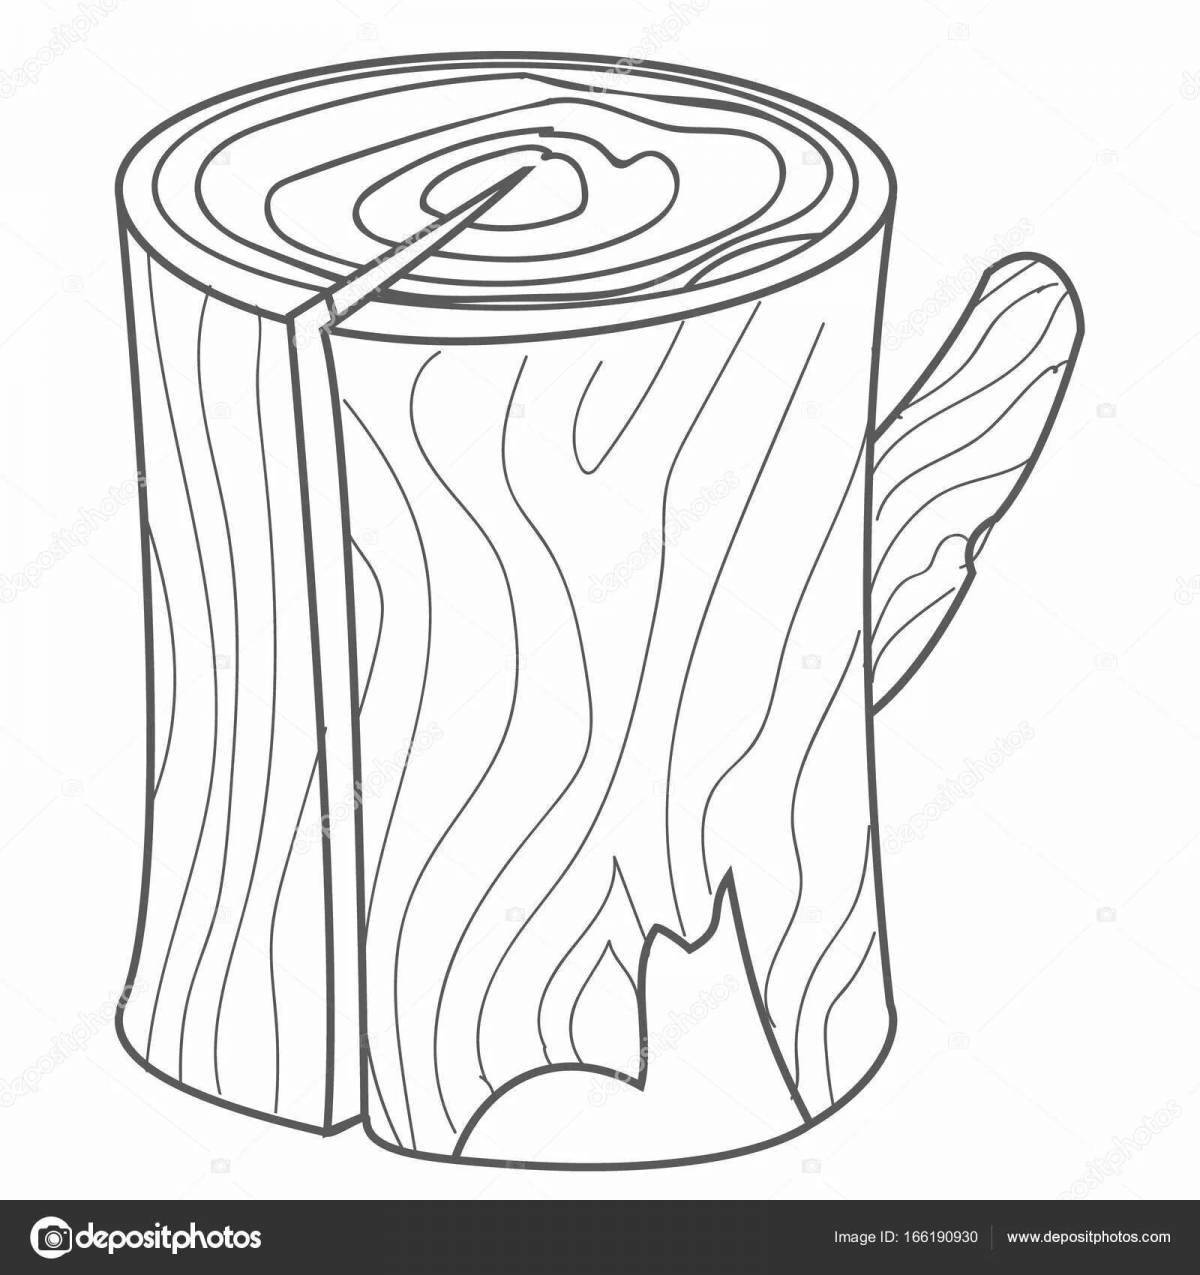 Adorable stump coloring for kids